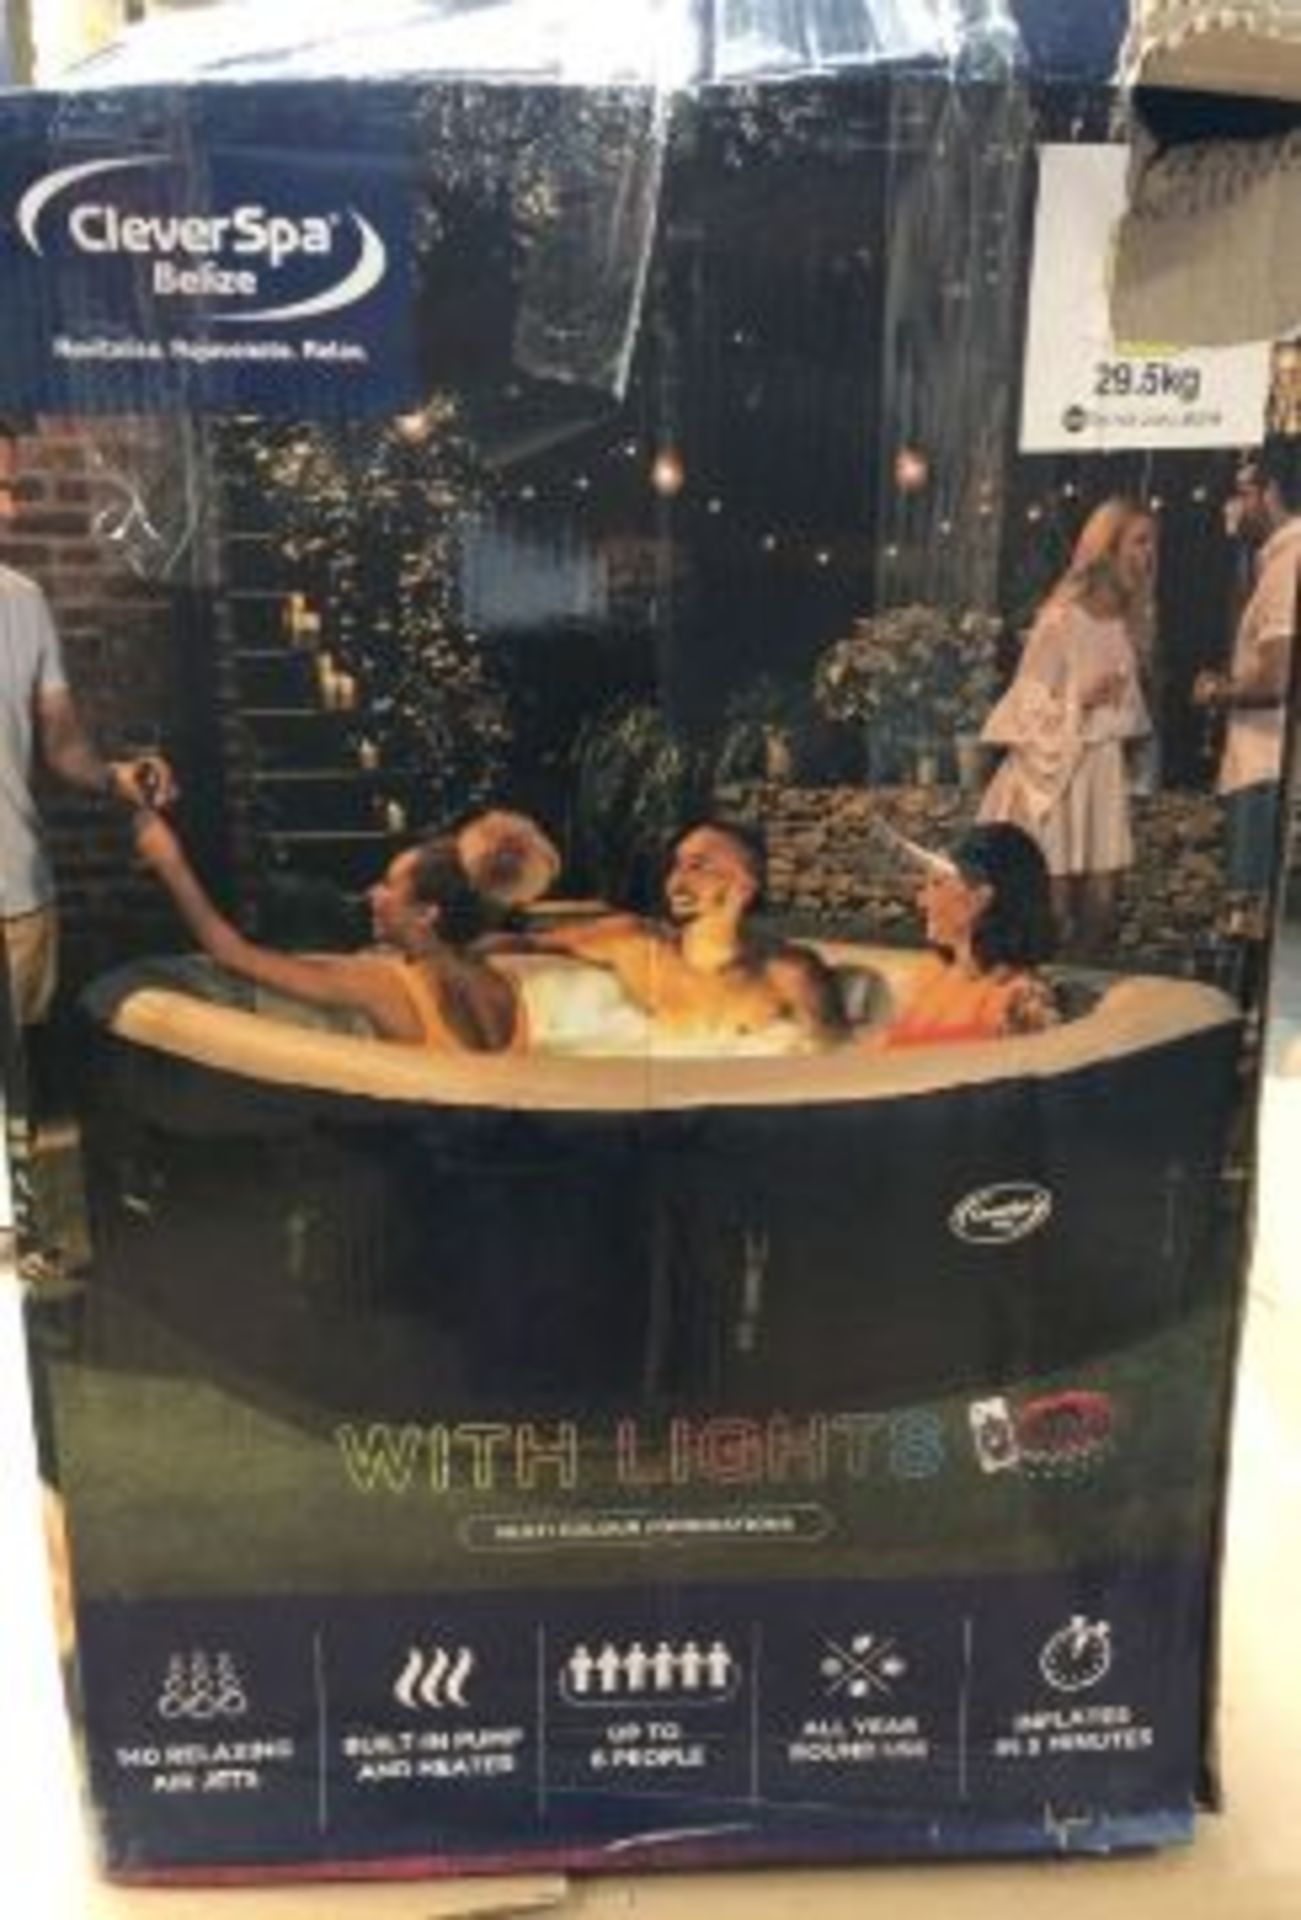 1 x CLEVERSPA BELIZE 6 PERSON HOT TUB - RRP £556.24